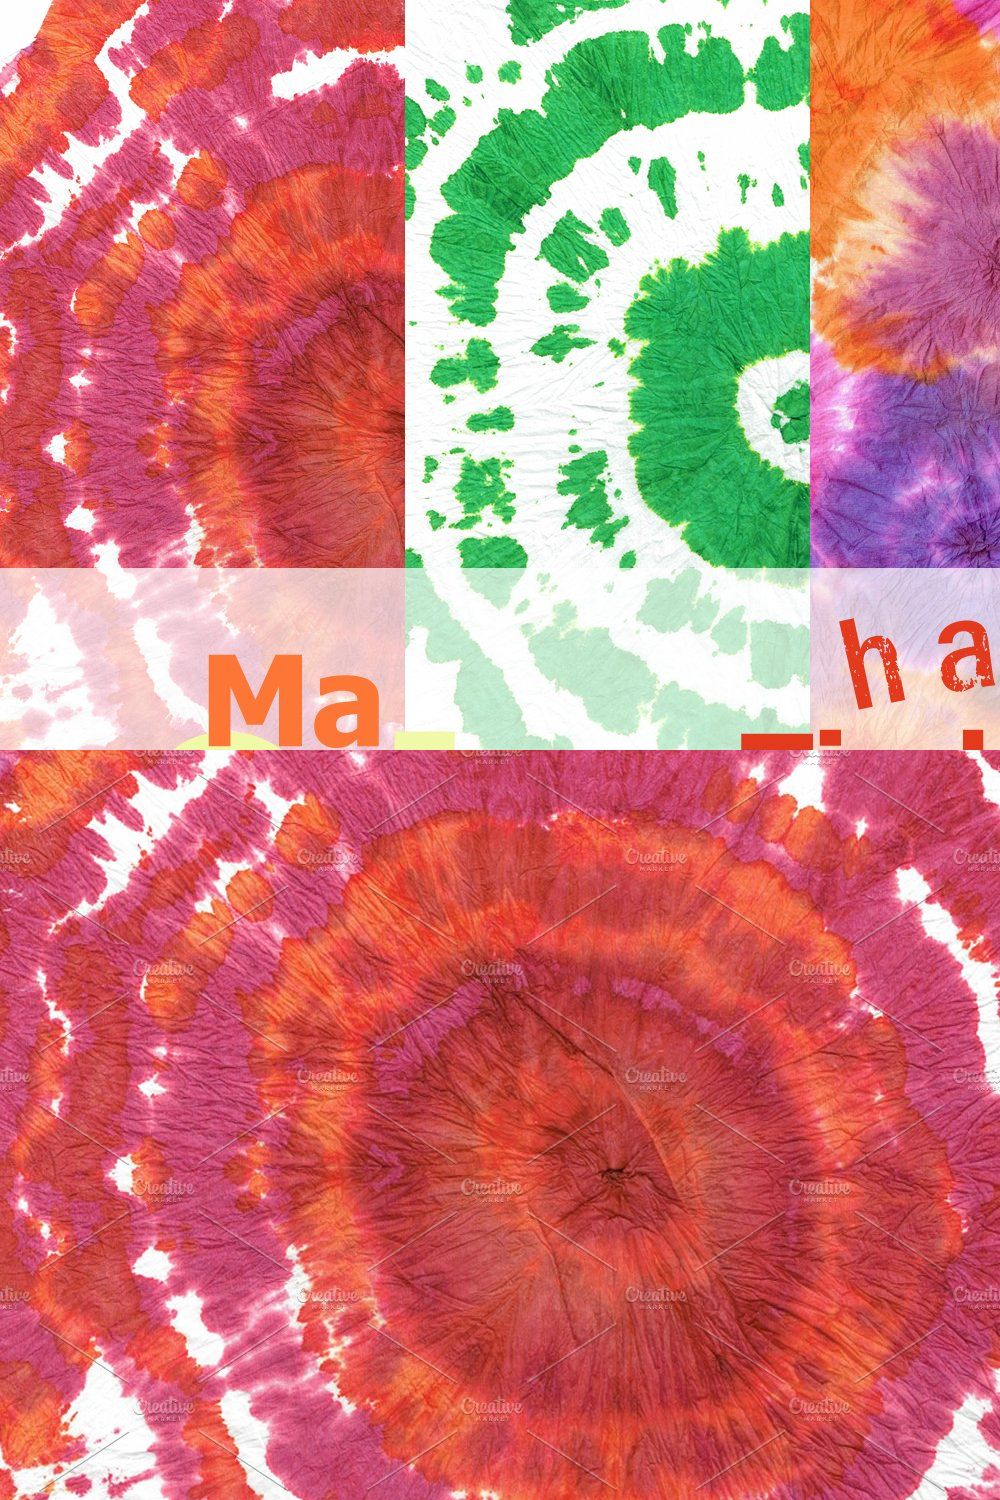 Tiedye textures pinterest preview image.